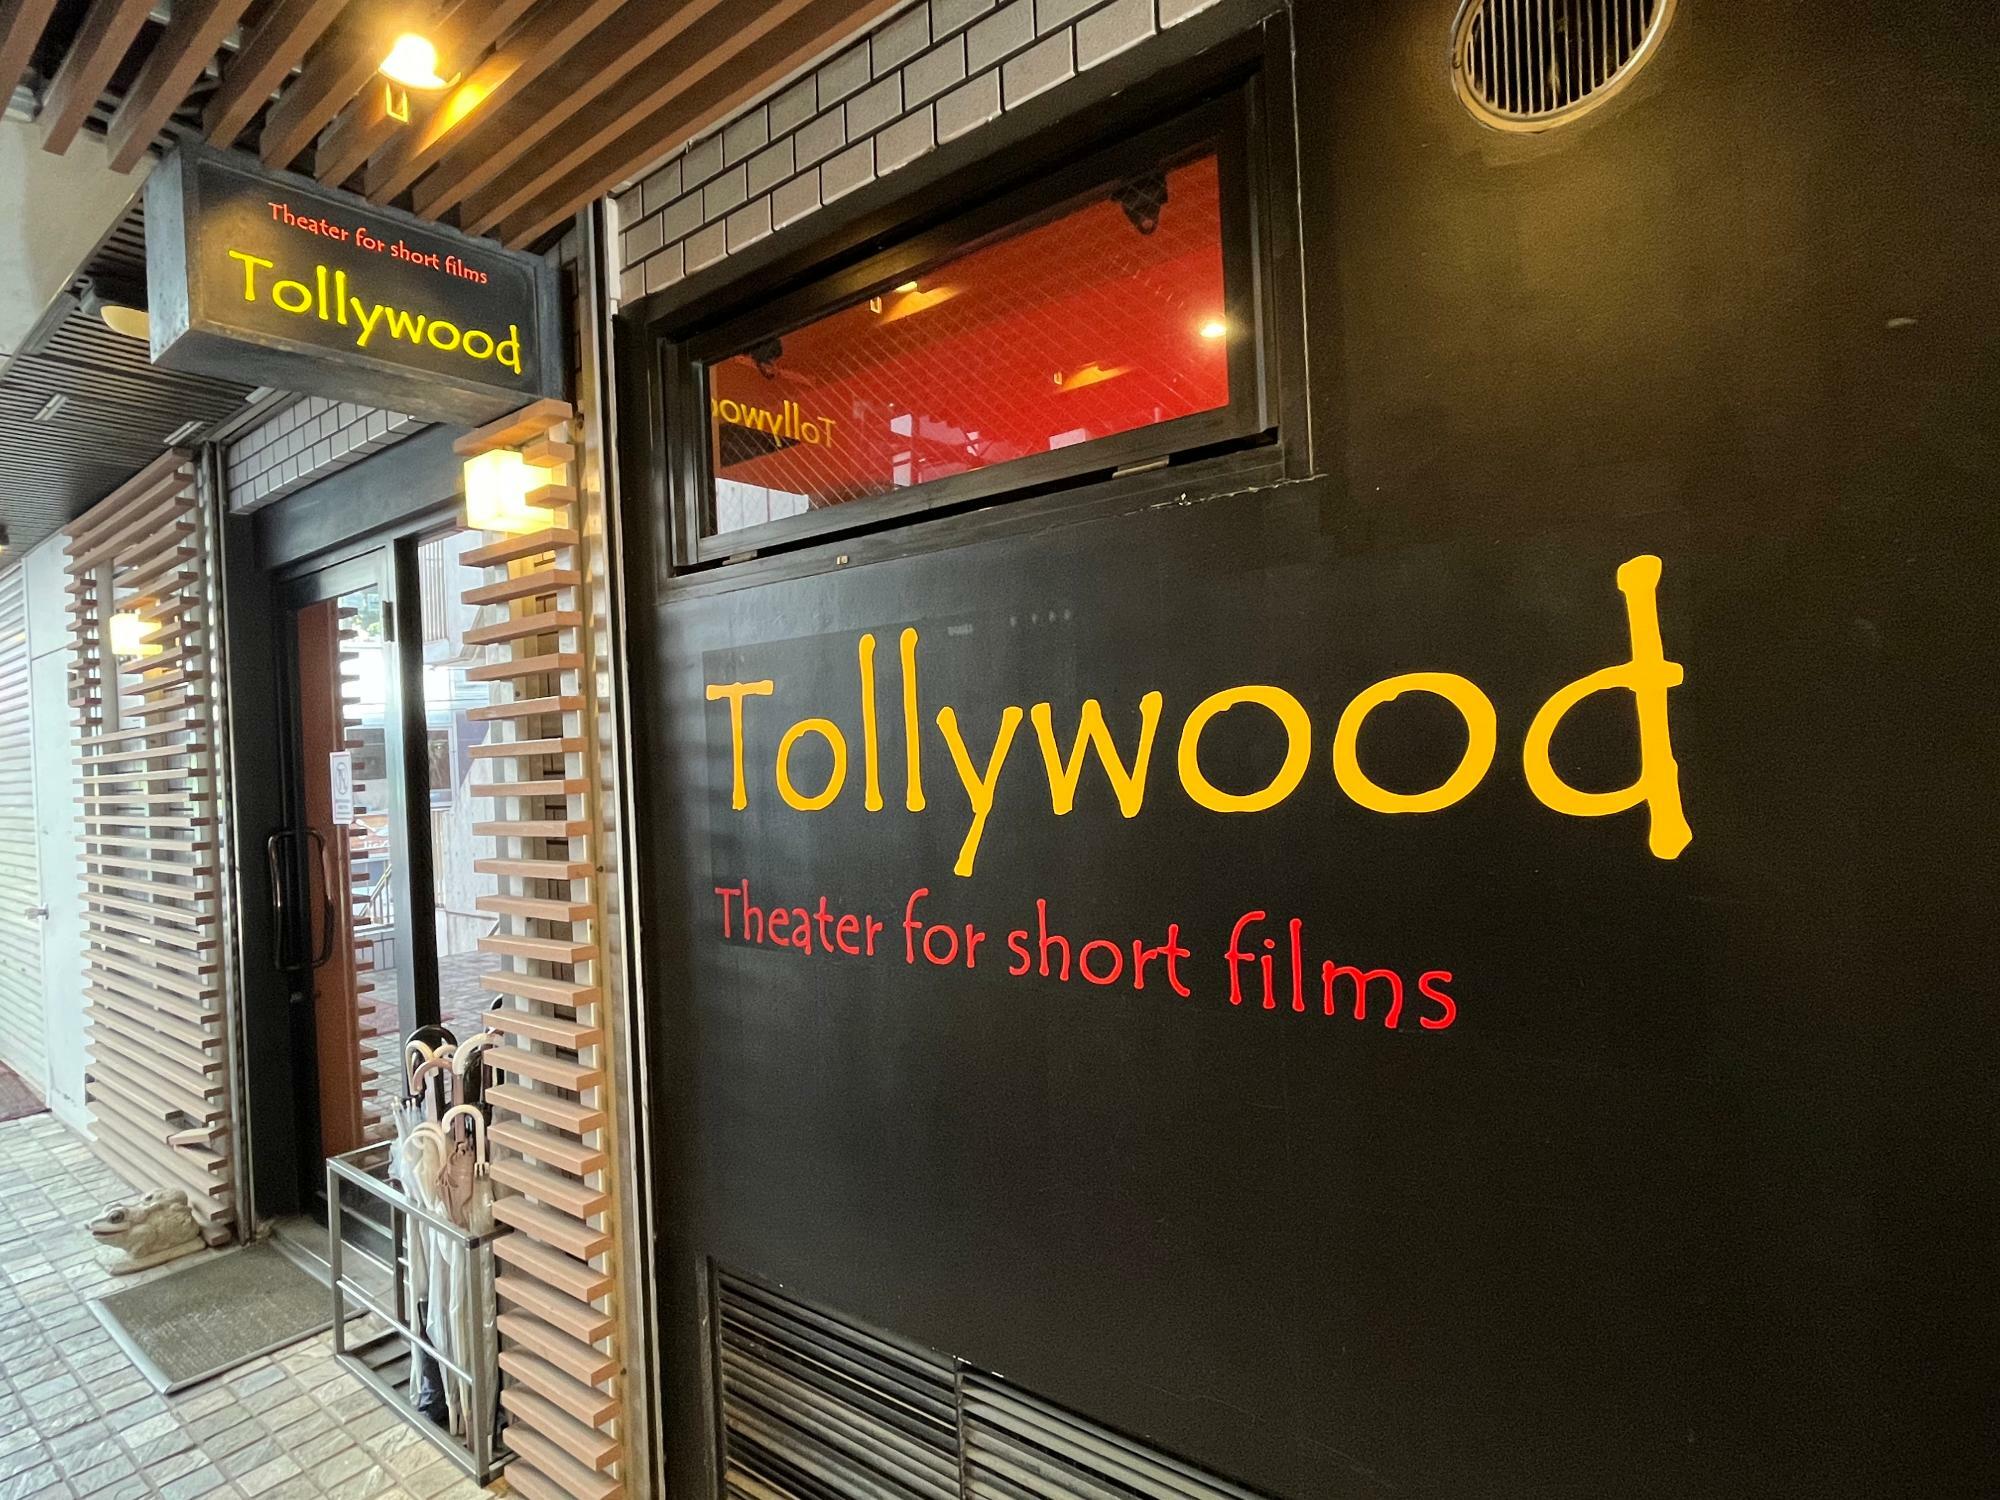 Tollywood Theater for short films